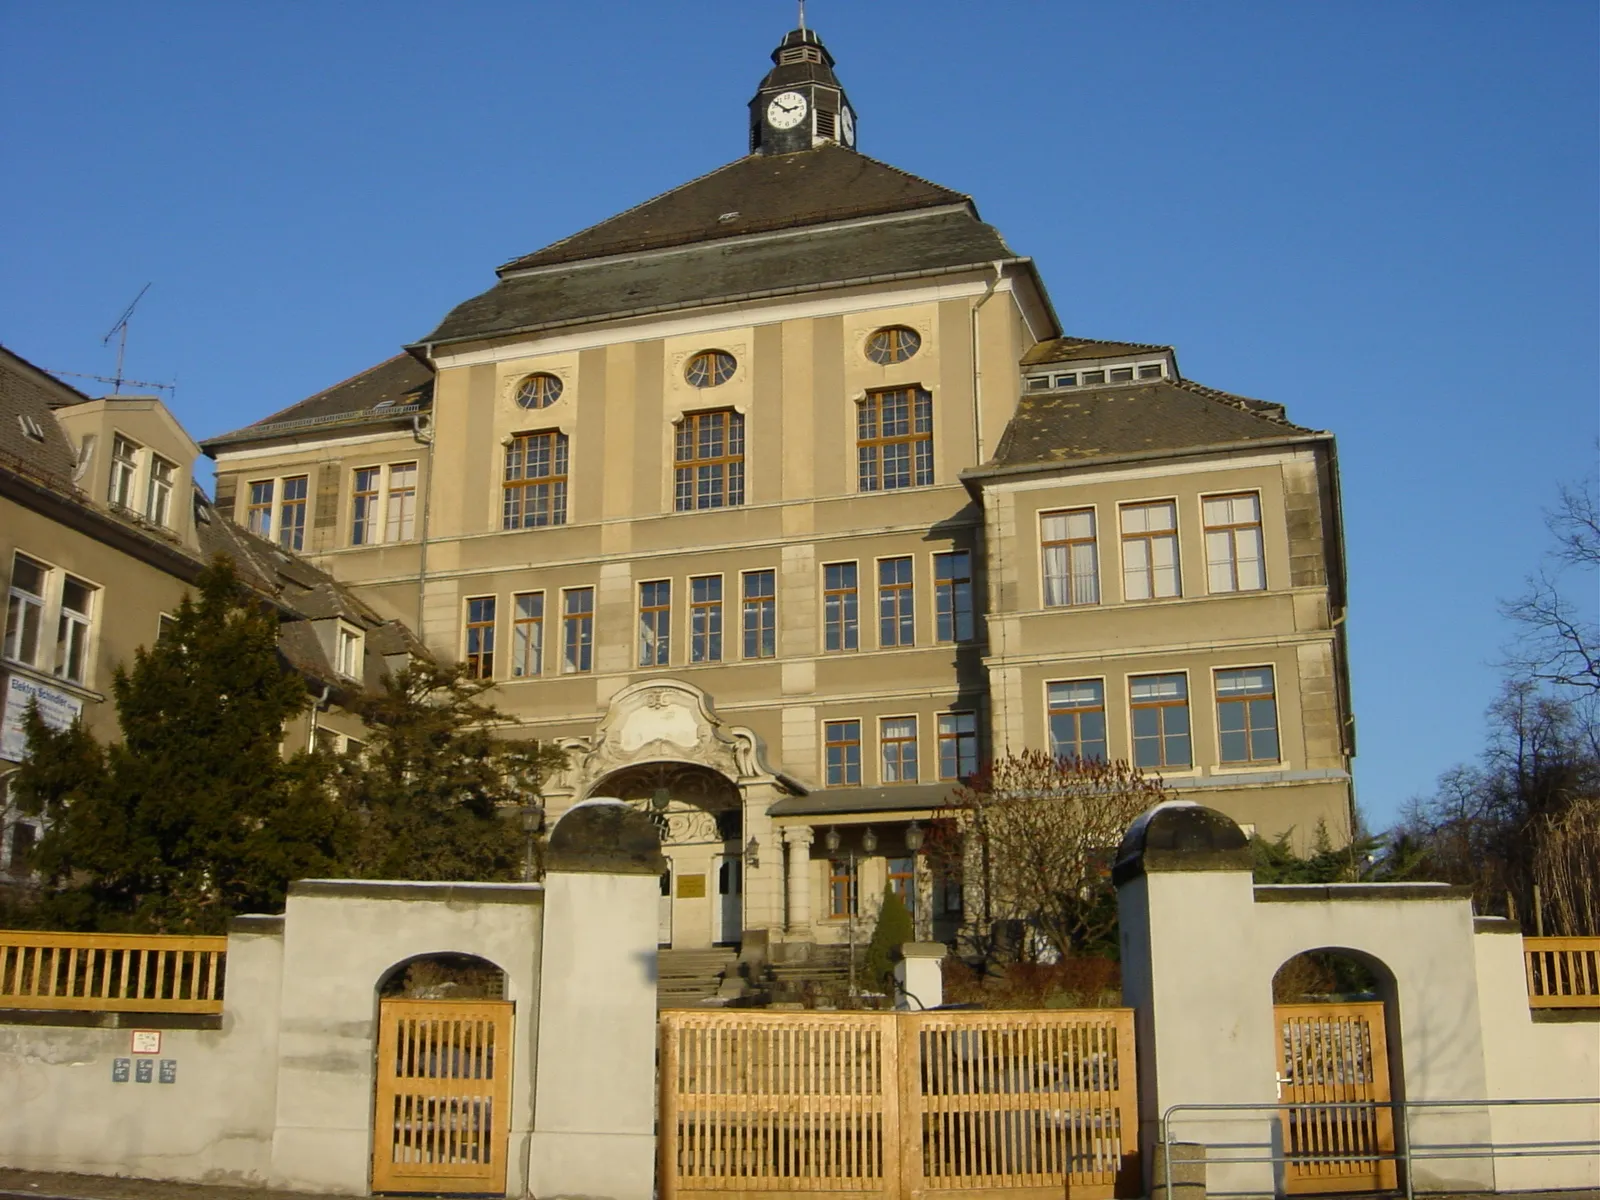 Photo showing: The secondary school "Gymnasium Am Breiten Teich" in the town of Borna.